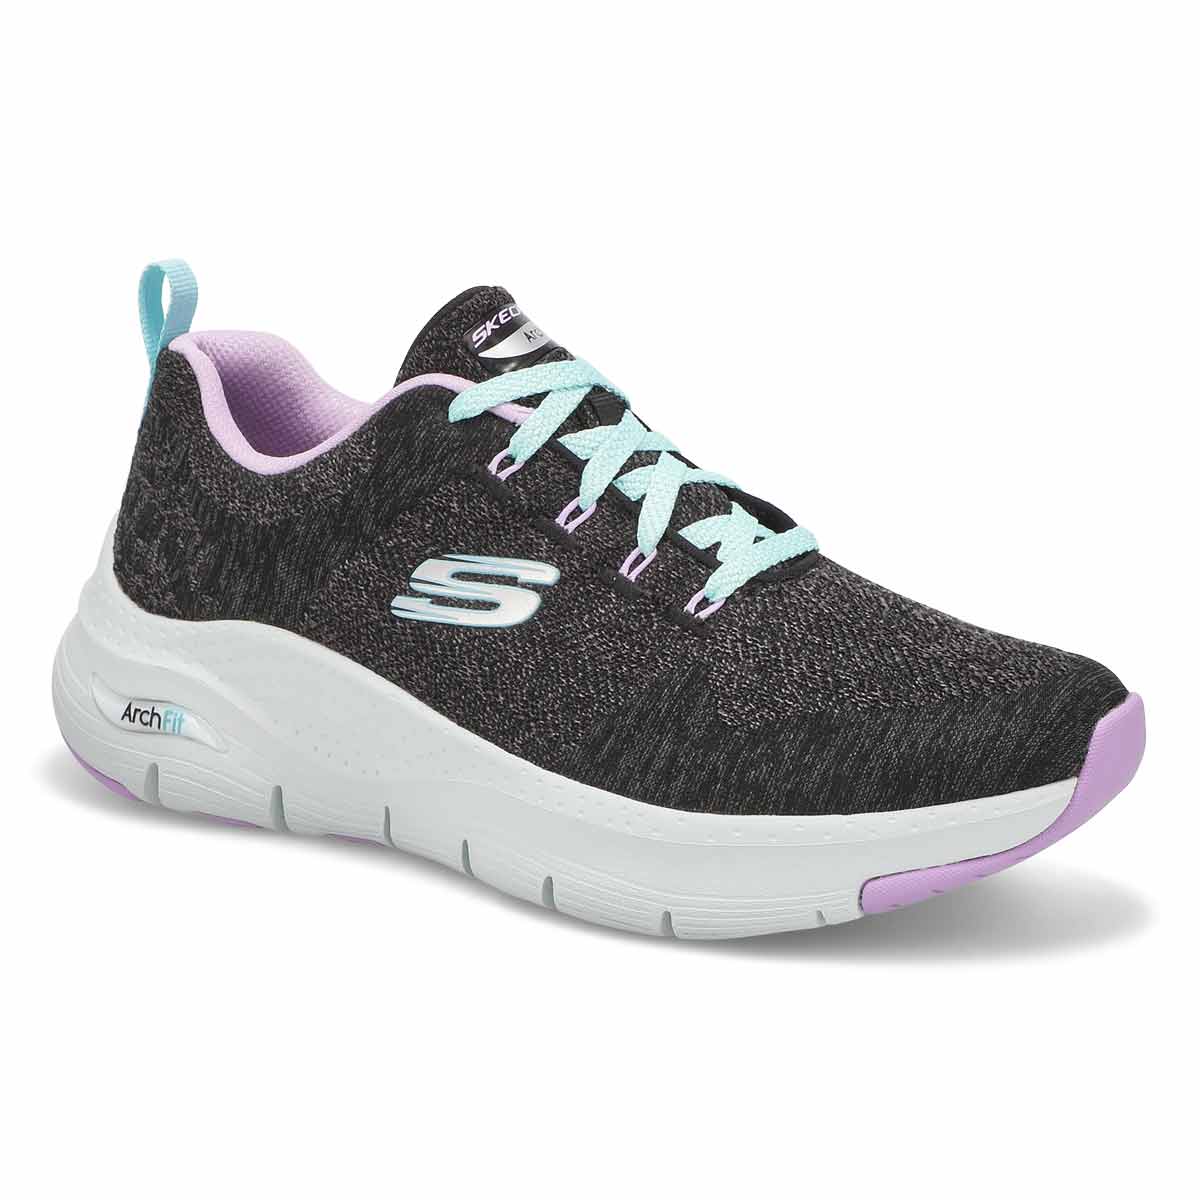 Skechers Women's Arch Arch Fit Comfy Wave Lace-Up Sneaker | eBay